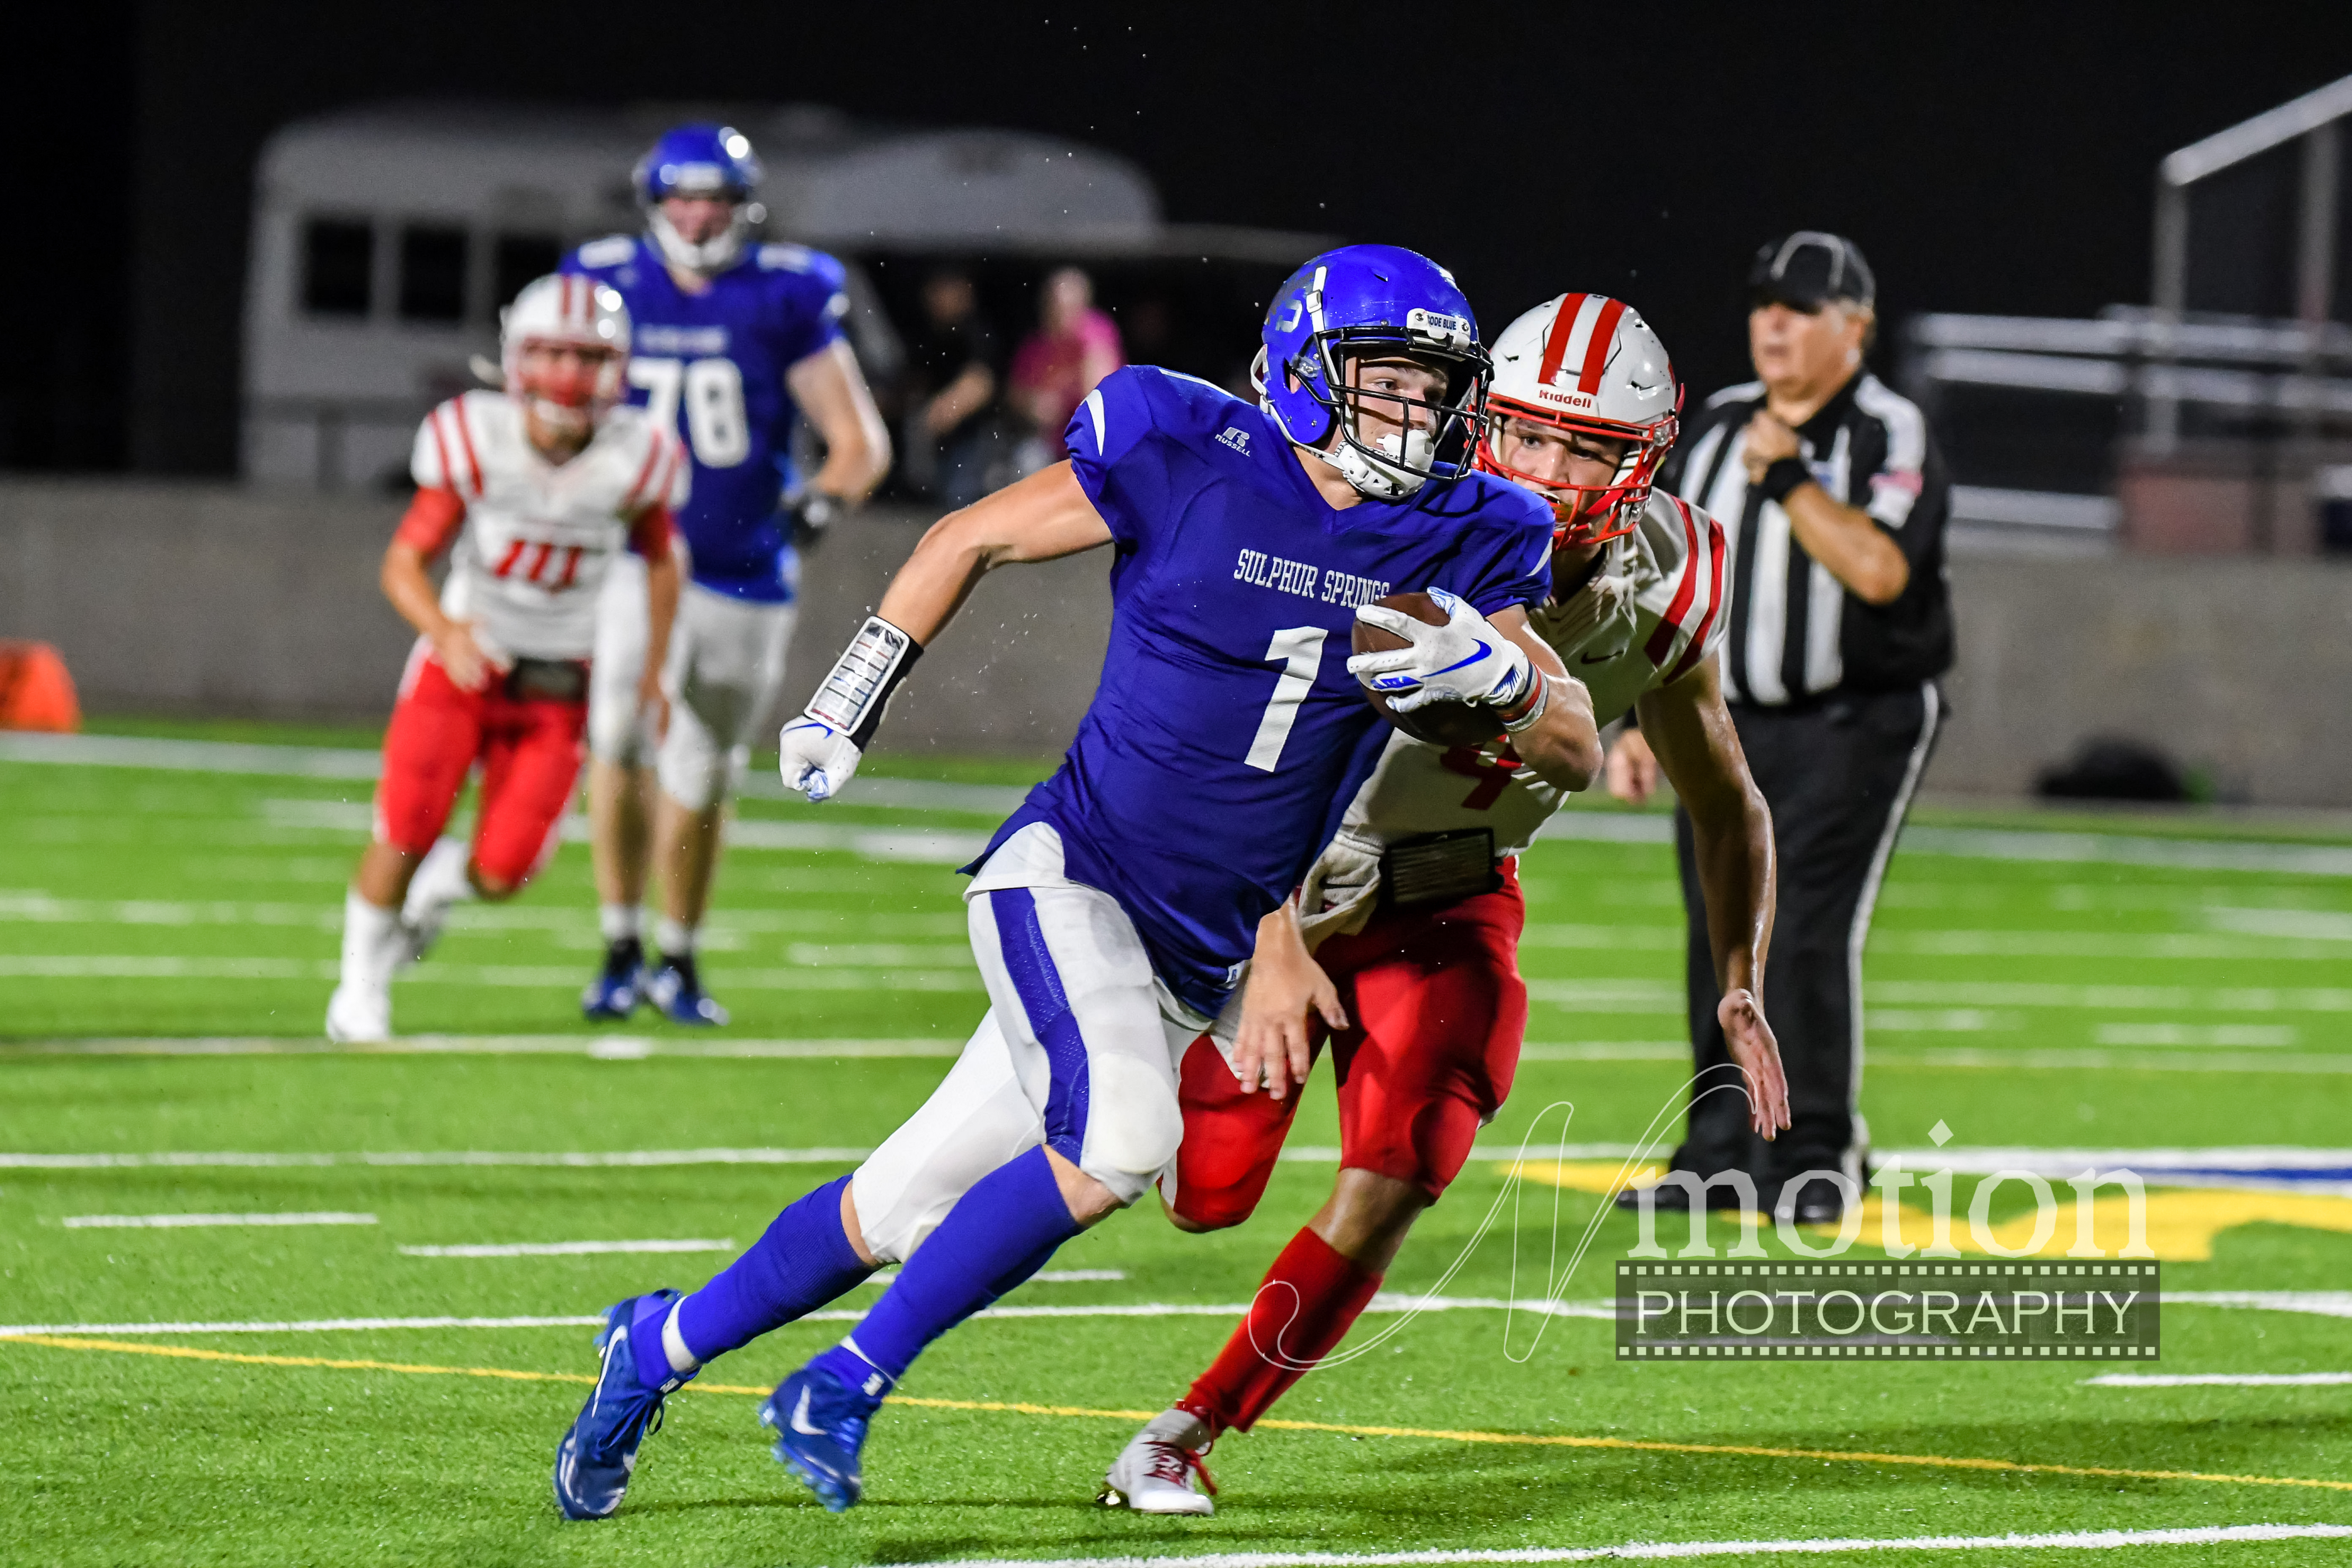 Photos from the Sulphur Springs Wildcats’ Homecoming Win by Cathy Bryan of Nmotion Photography!